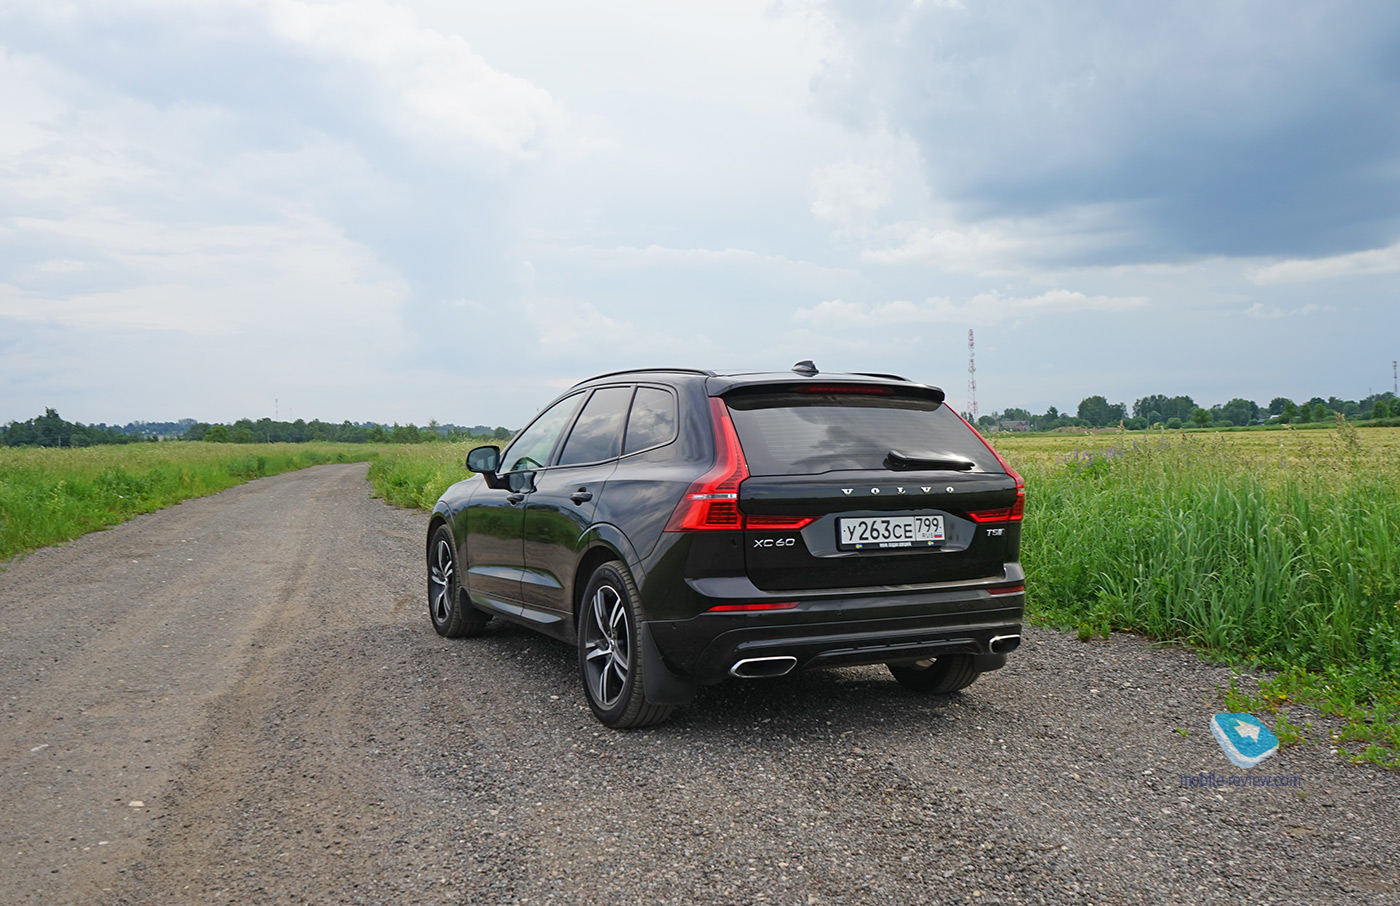 Volvo XC60 test. From Sweden with love